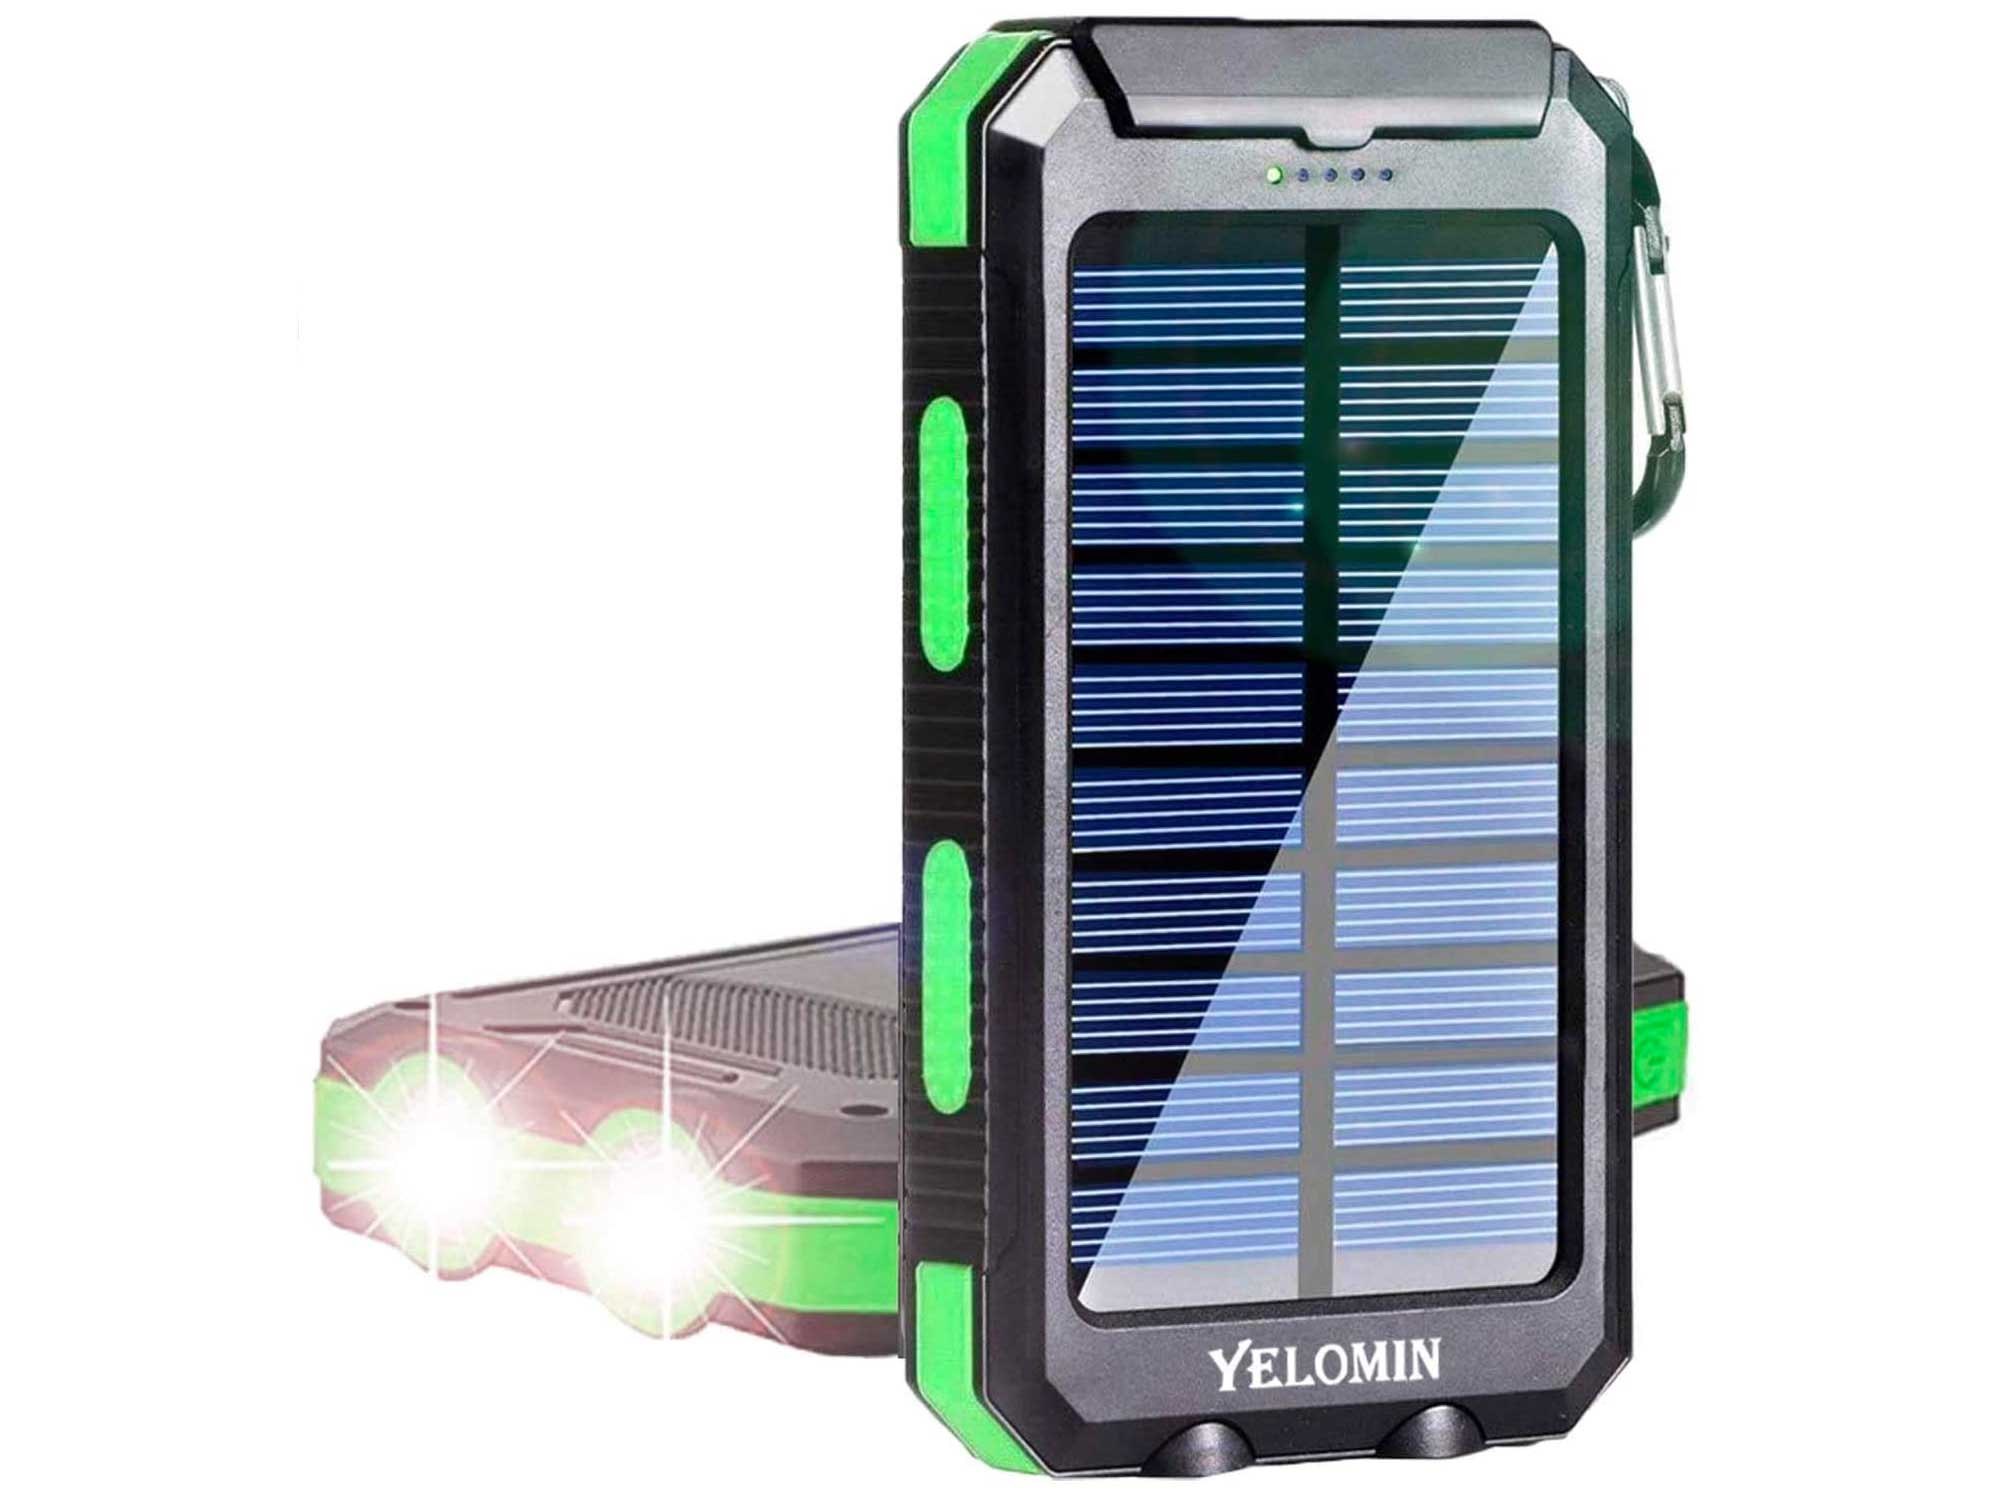 Solar Charger 20000mAh,YELOMIN Portable Outdoor Mobile Power Bank,Camping Travel External Backup Battery Pack Dual USB 5V Outputs 2 LED Light Flashlight with Compass